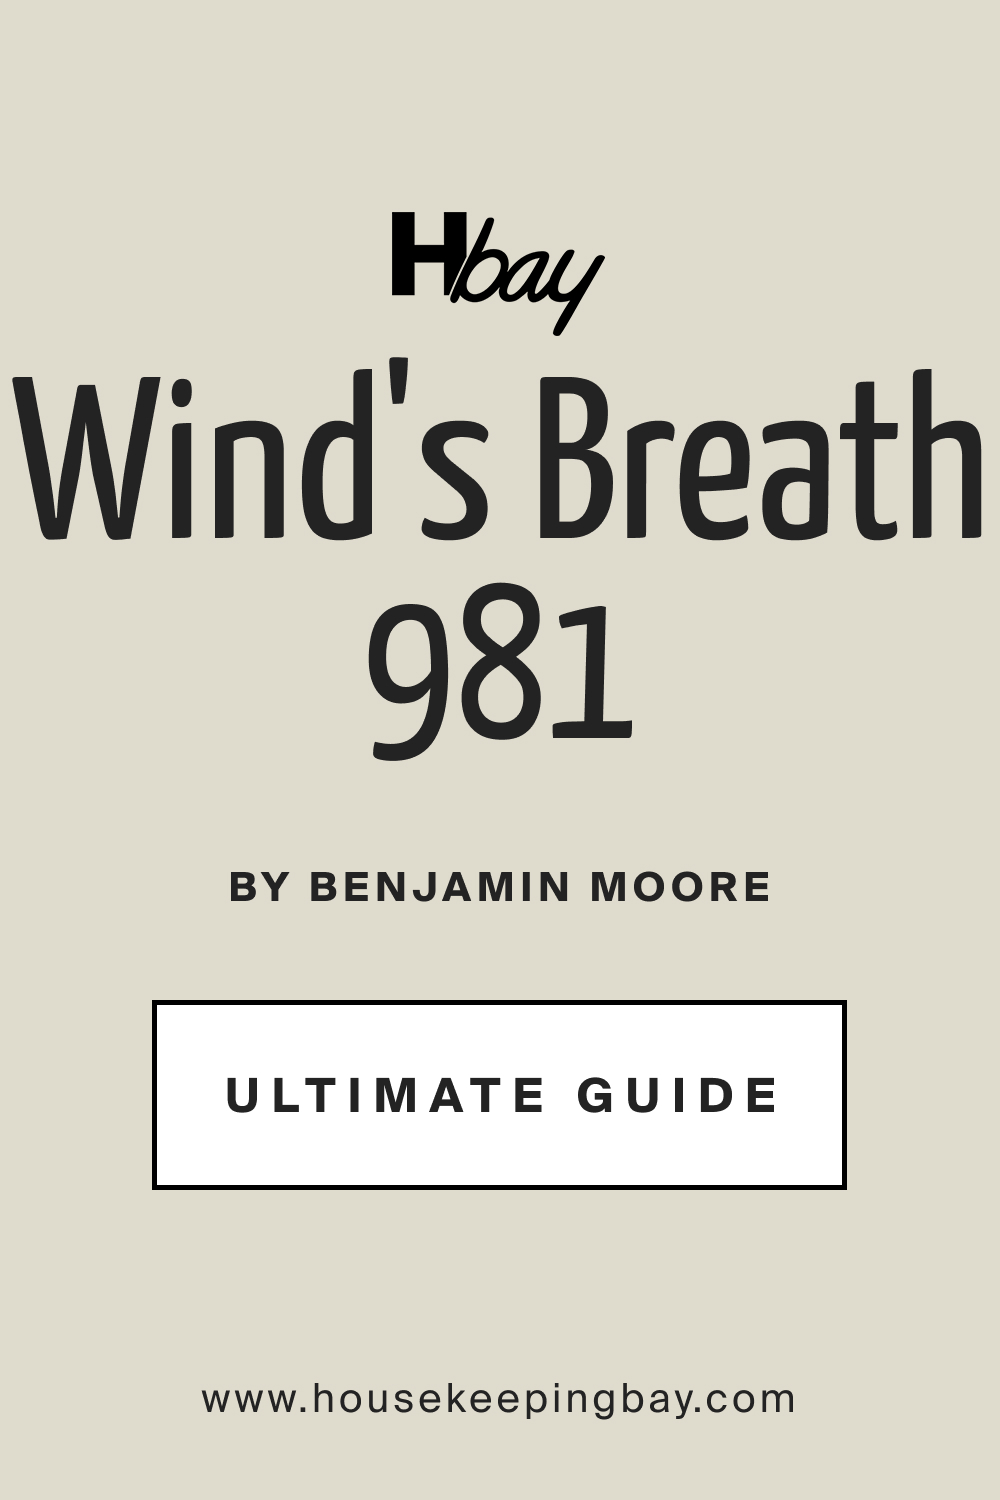 Guide of Wind's Breath 981 Paint Color by Benjamin Moore